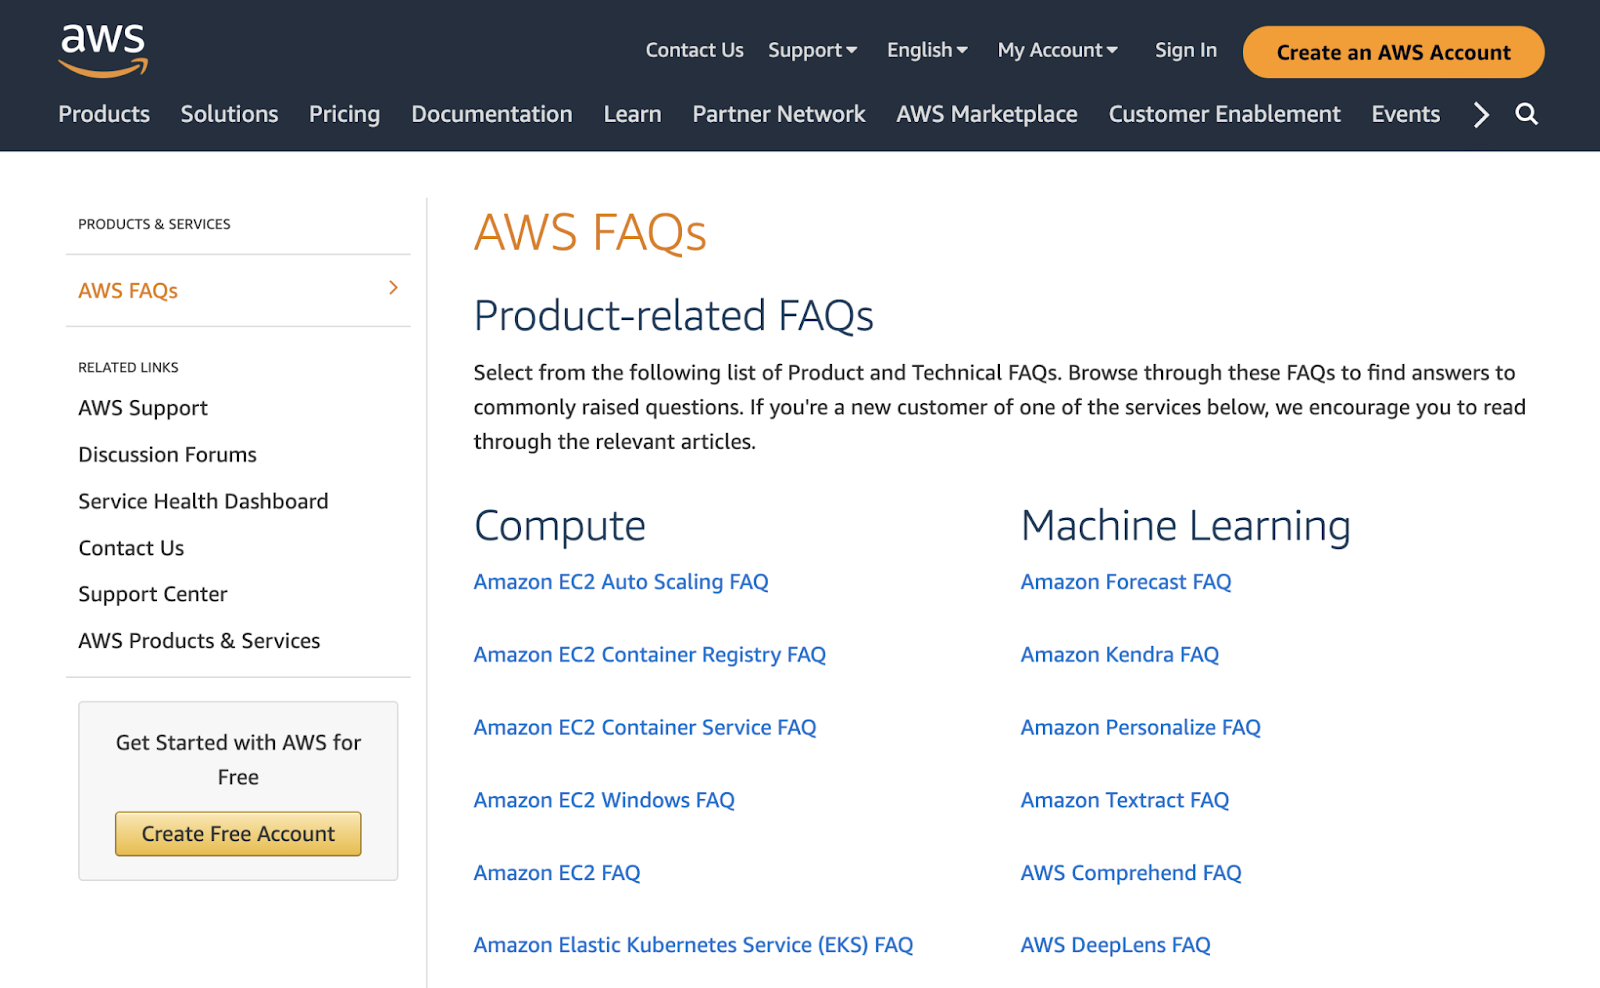 Amazon AWS faq leafage   illustration  with links to each   idiosyncratic  product's faq page.